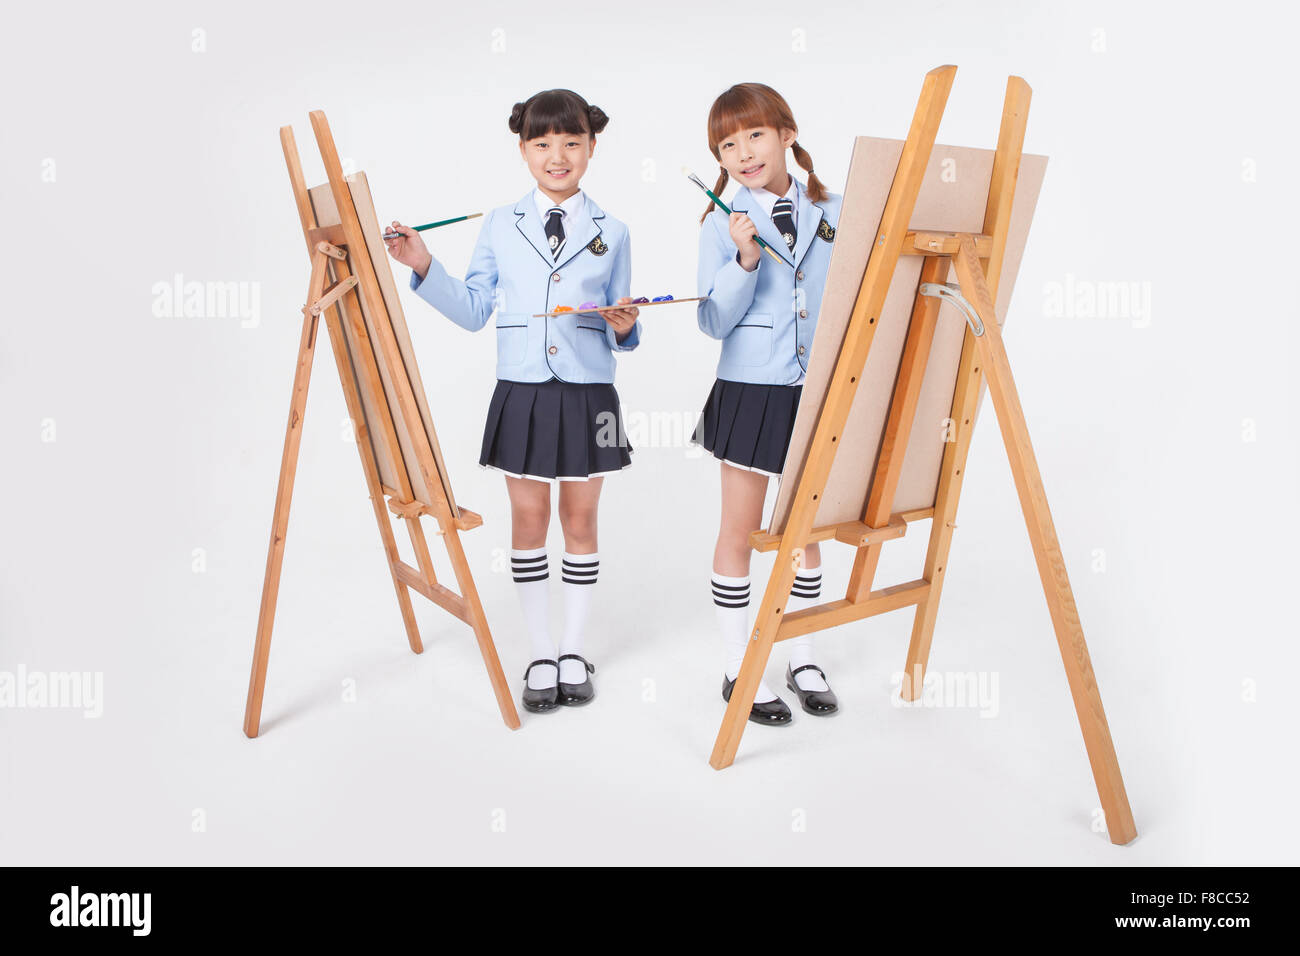 Two elementary school girls in school uniforms standing with easels and holding brushes both staring forward with a smile Stock Photo